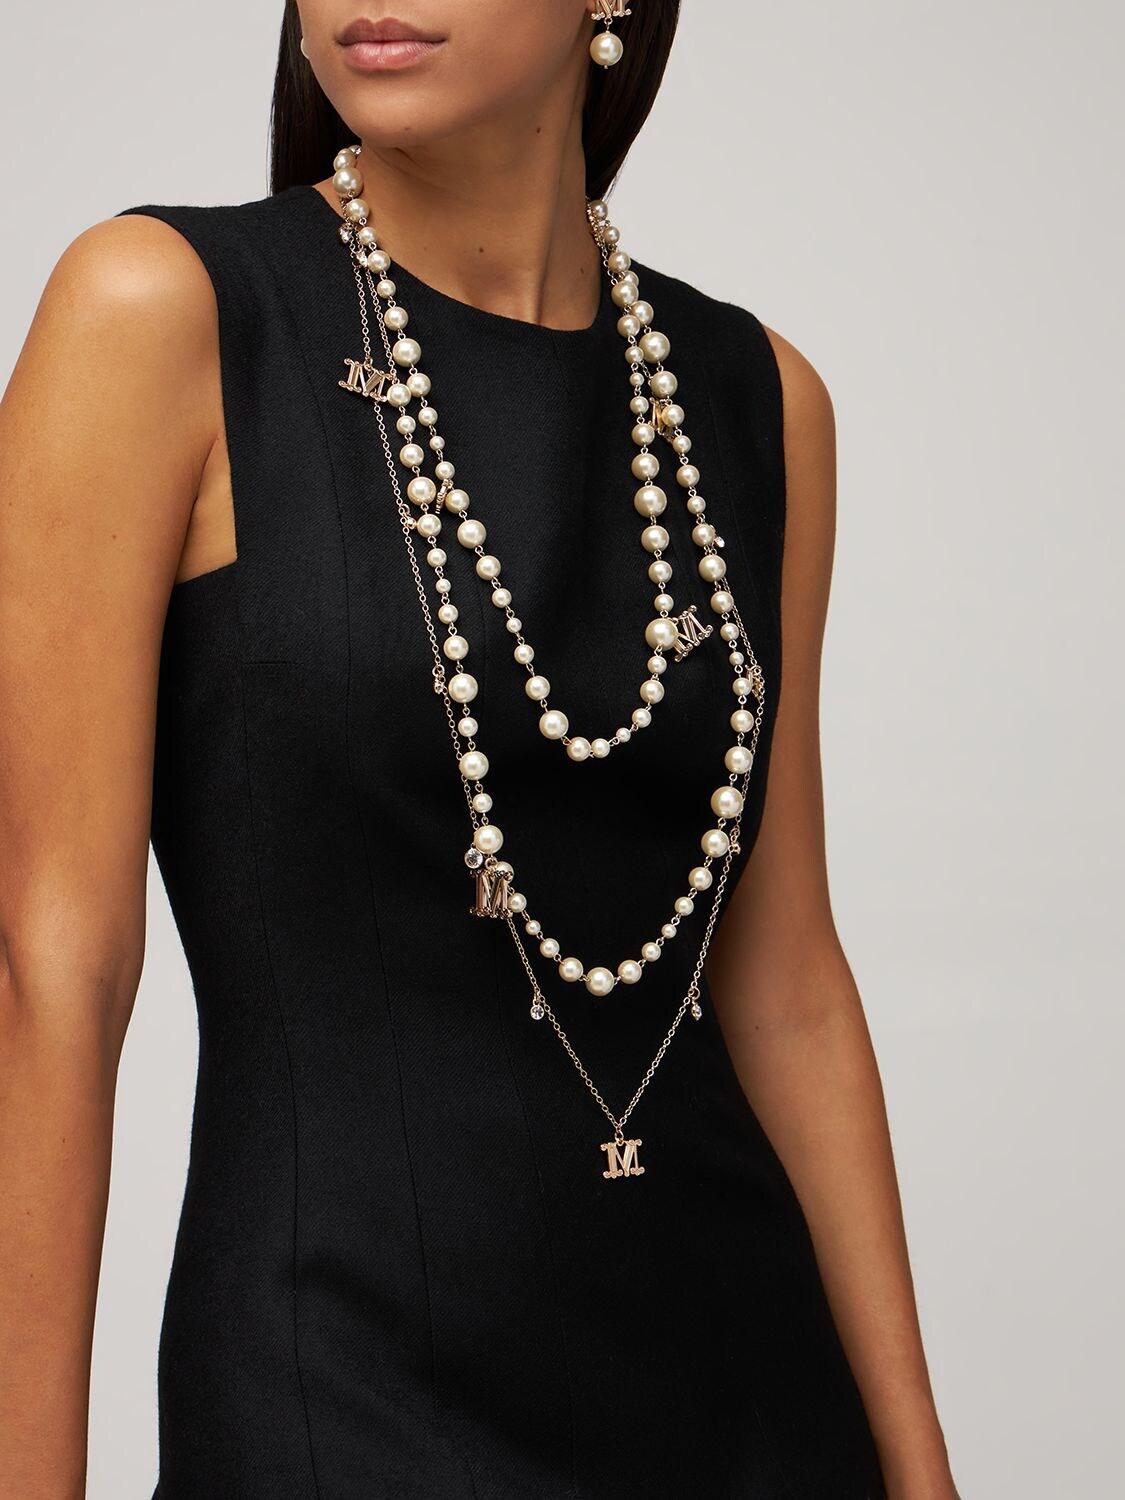 Max Mara Monogram Crystal & Faux Pearl Necklace in White | Lyst UK